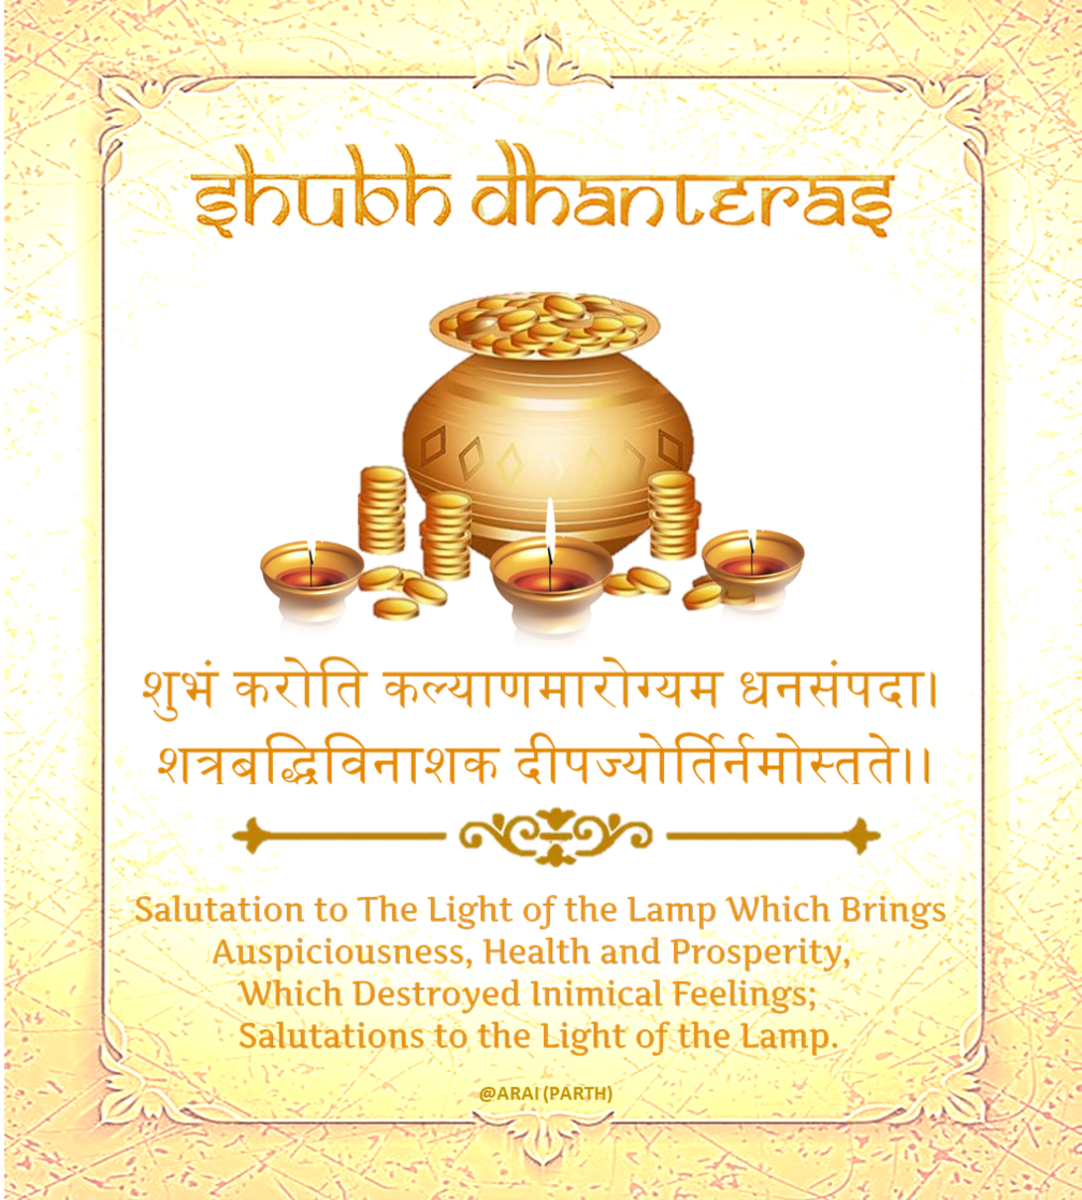 Dhanteras Wishes in Hindi 